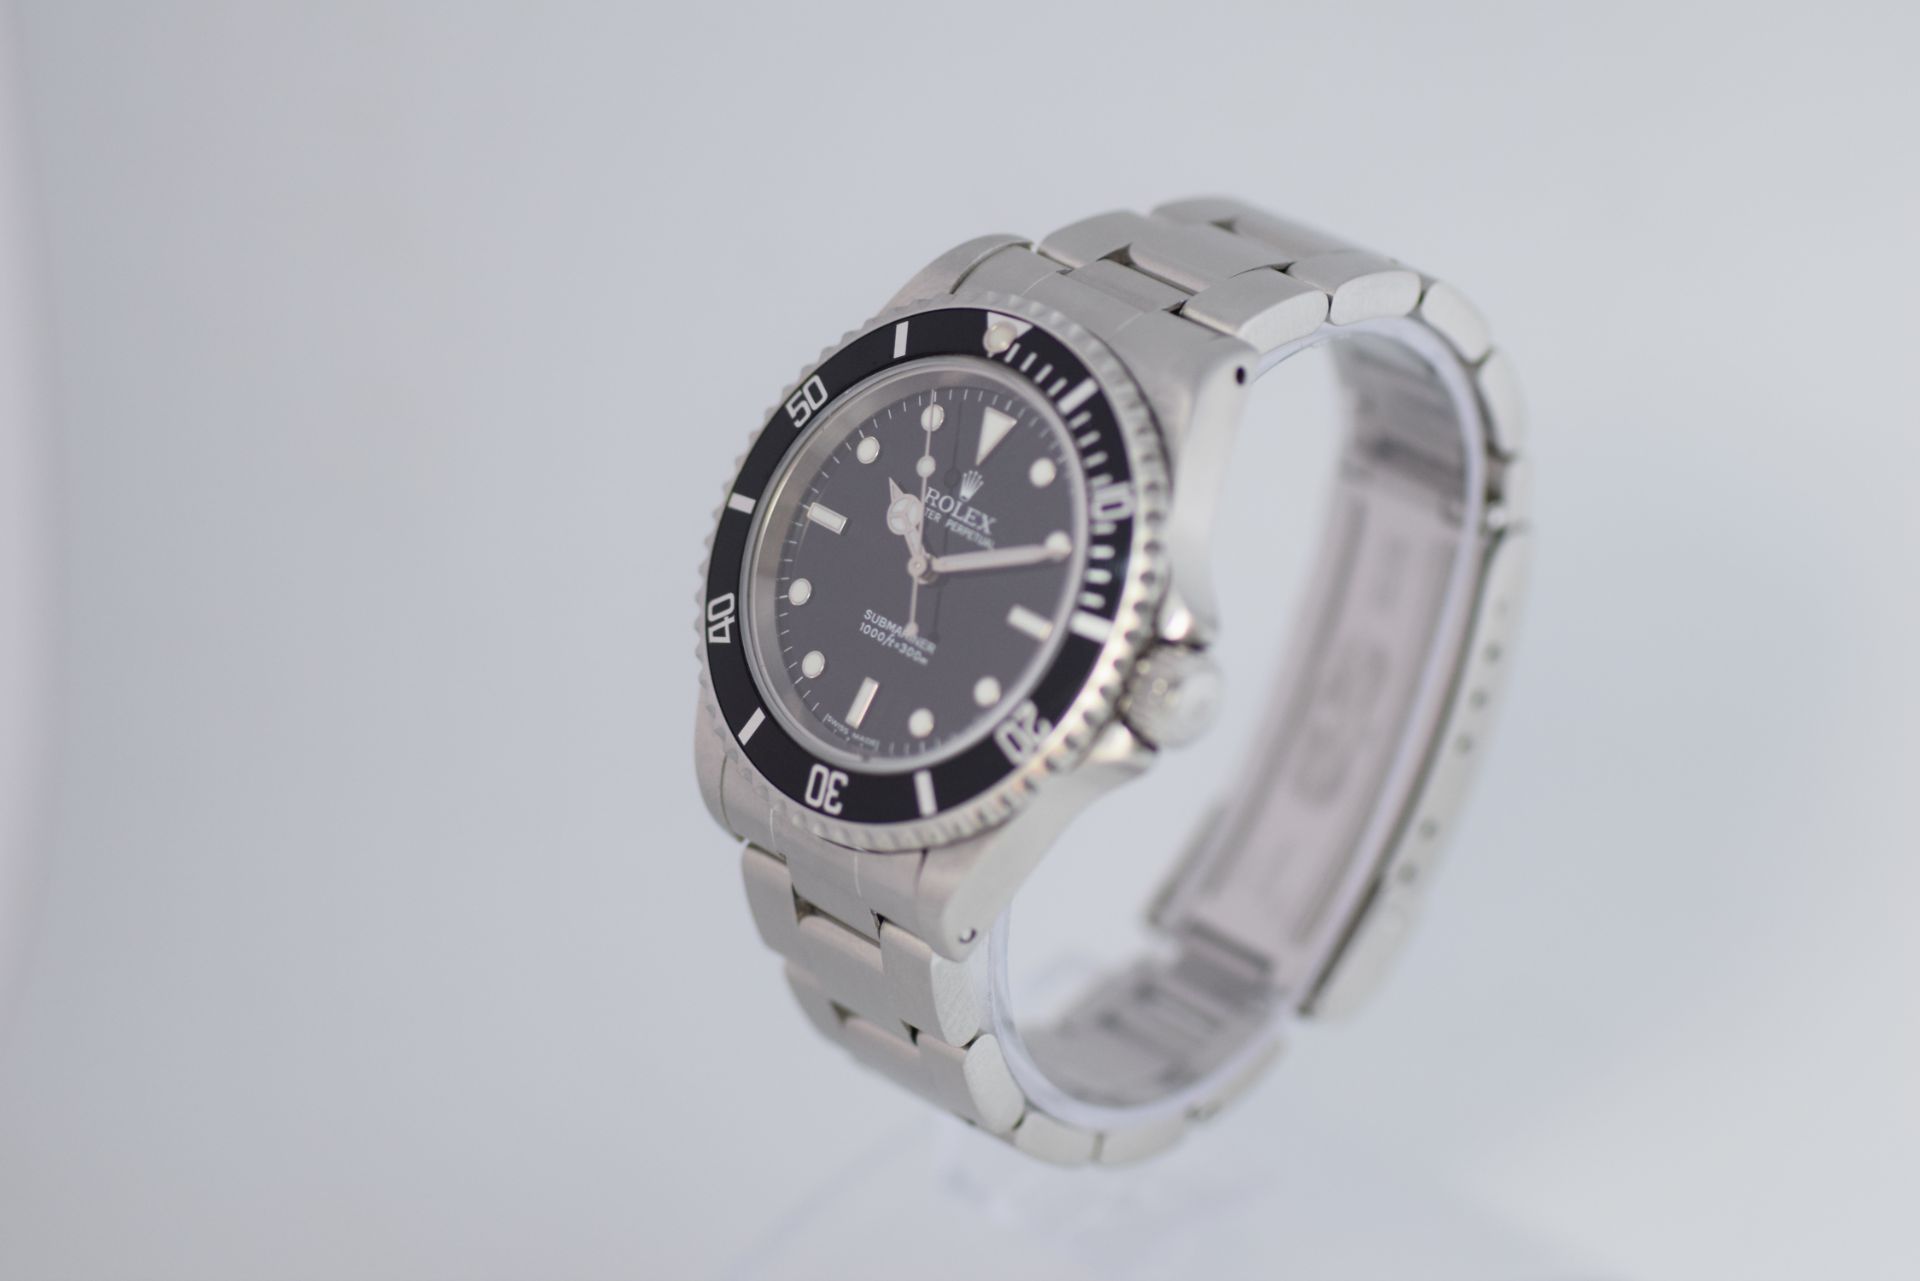 ROLEX 14060M SUBMARINER with ROLEX BOX 1YR WTY - Image 4 of 9